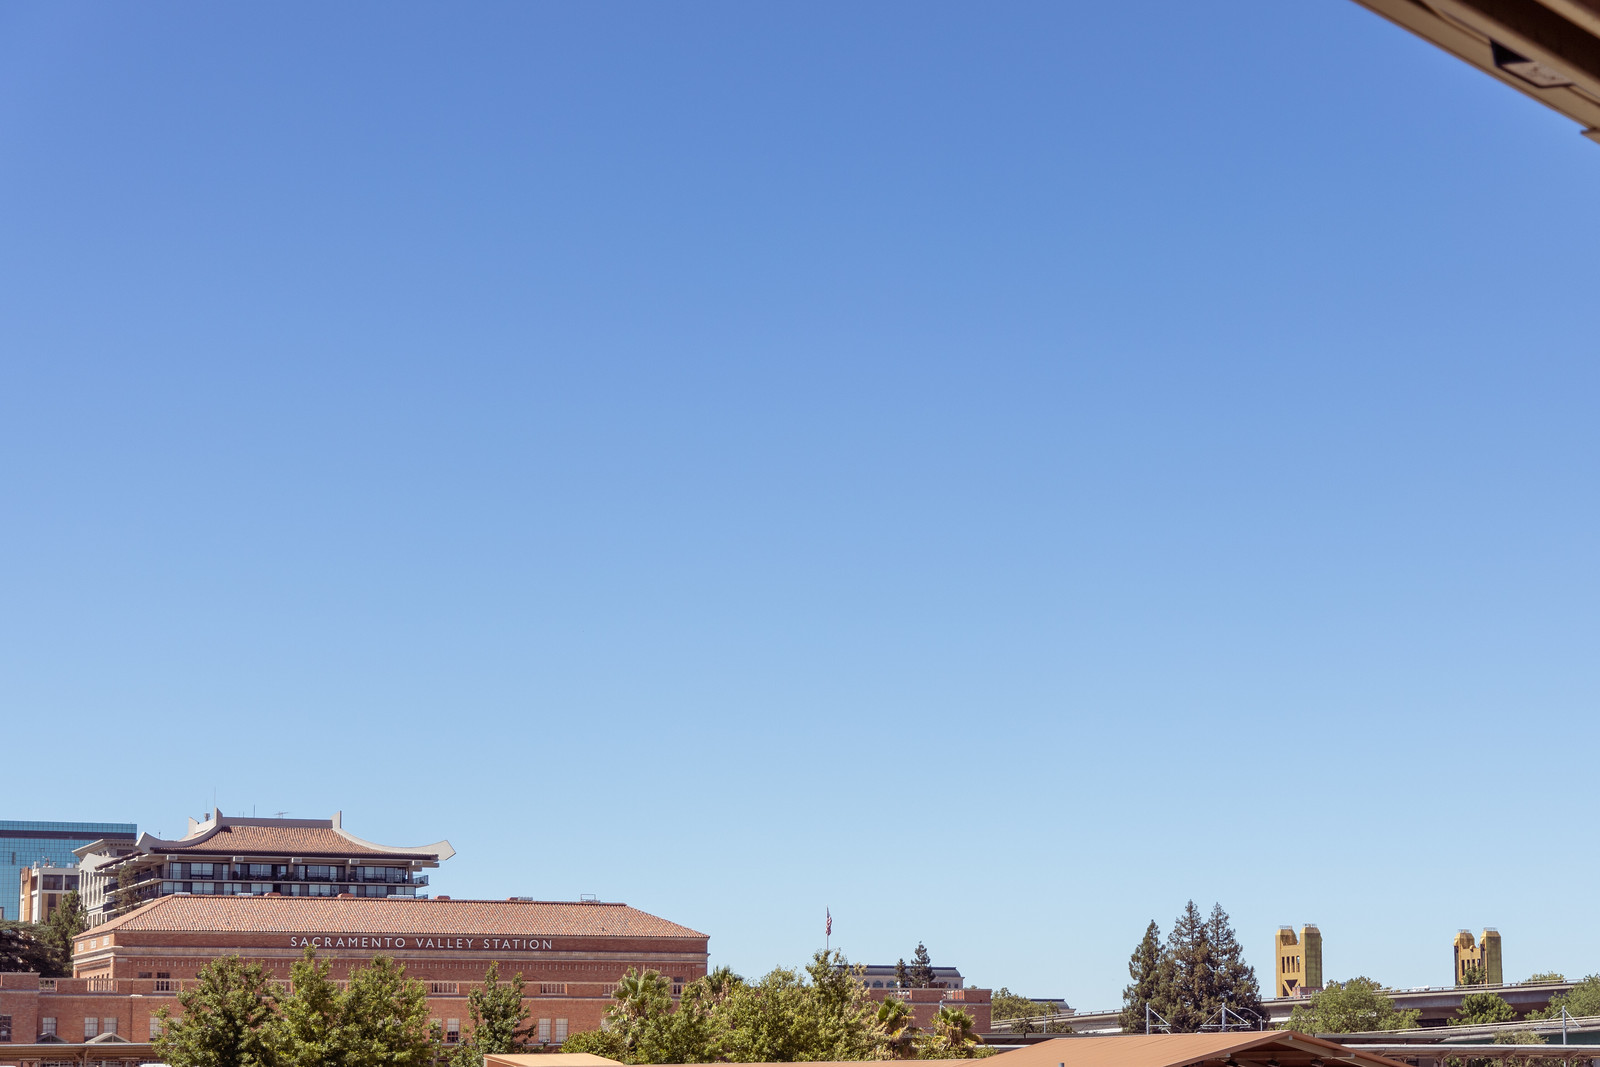 A brick building labeled 'Sacramento Valley Station' near a yellow bridge, a larger pagoda-style building, and a glass office building beyond. The frame is dominated by the blue sky